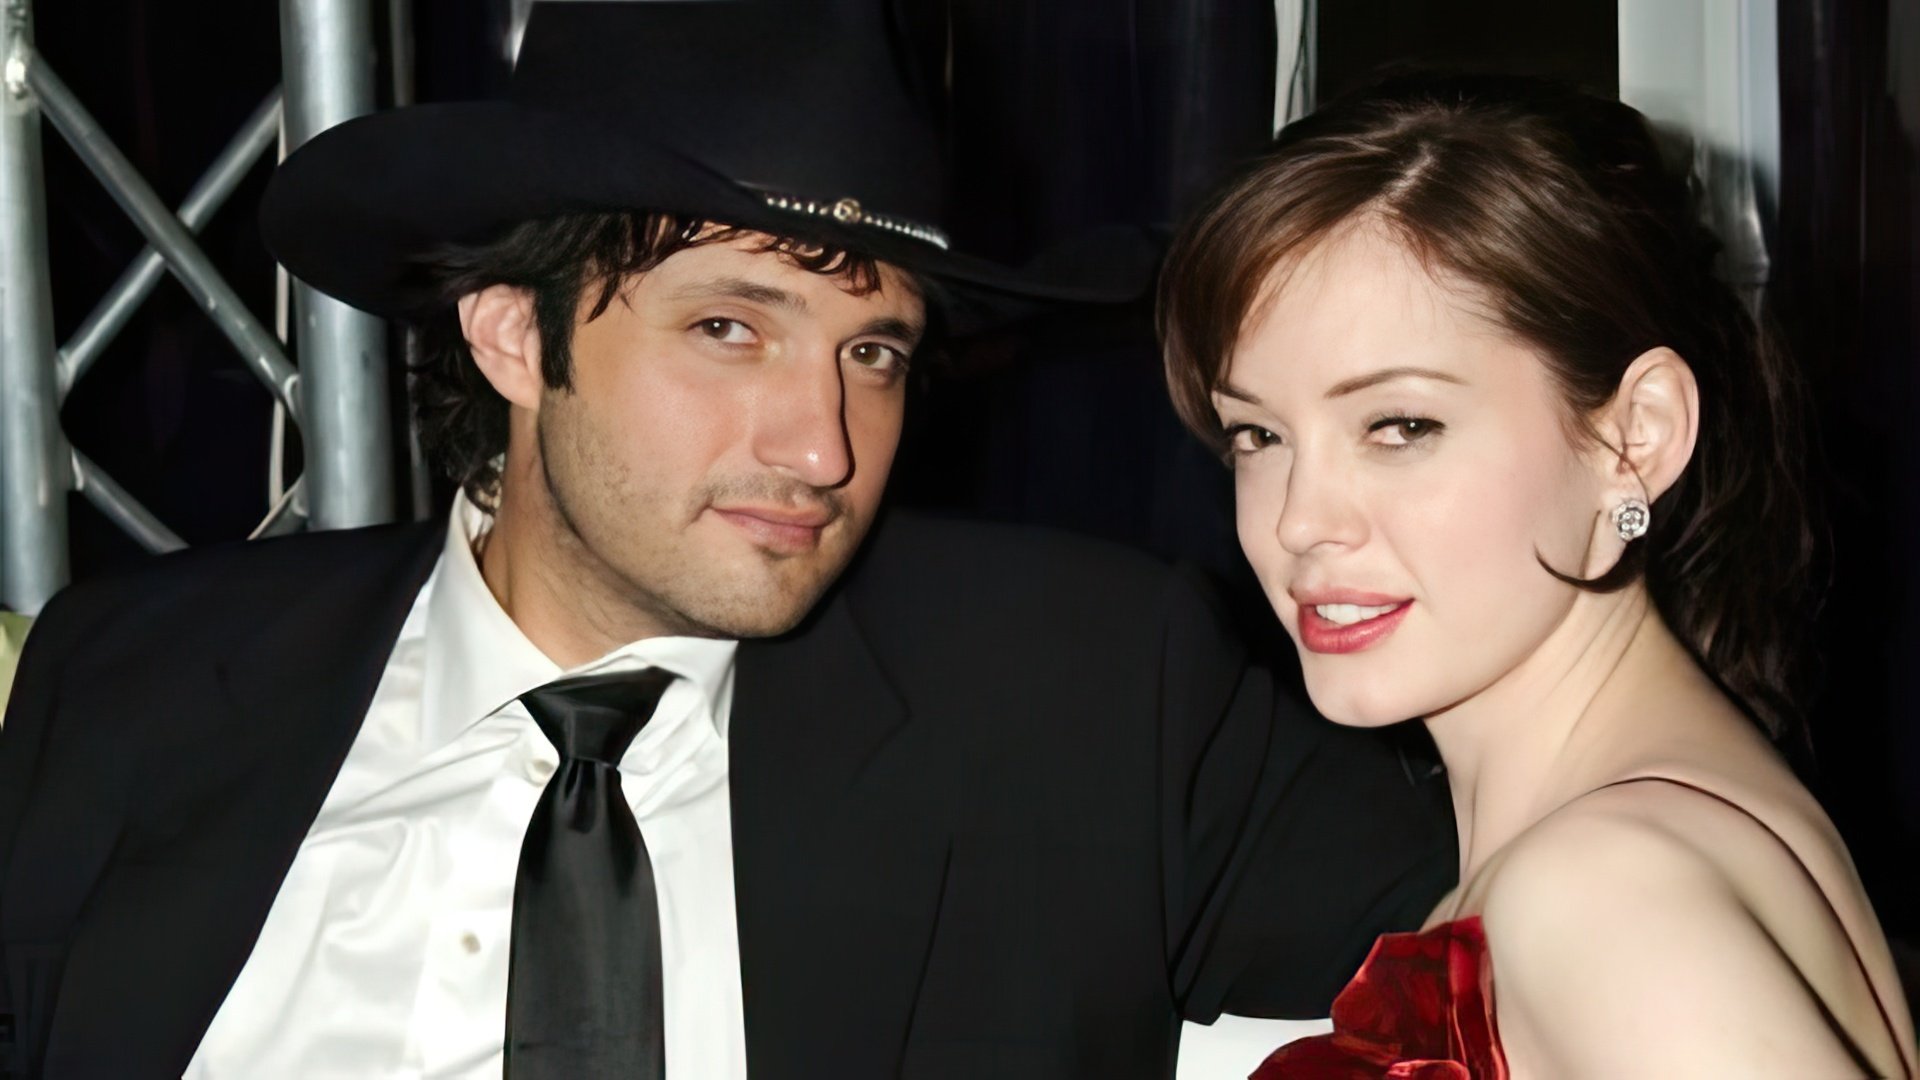 Rose McGowan and Robert Rodriguez dated, but in the end, he returned to his wife